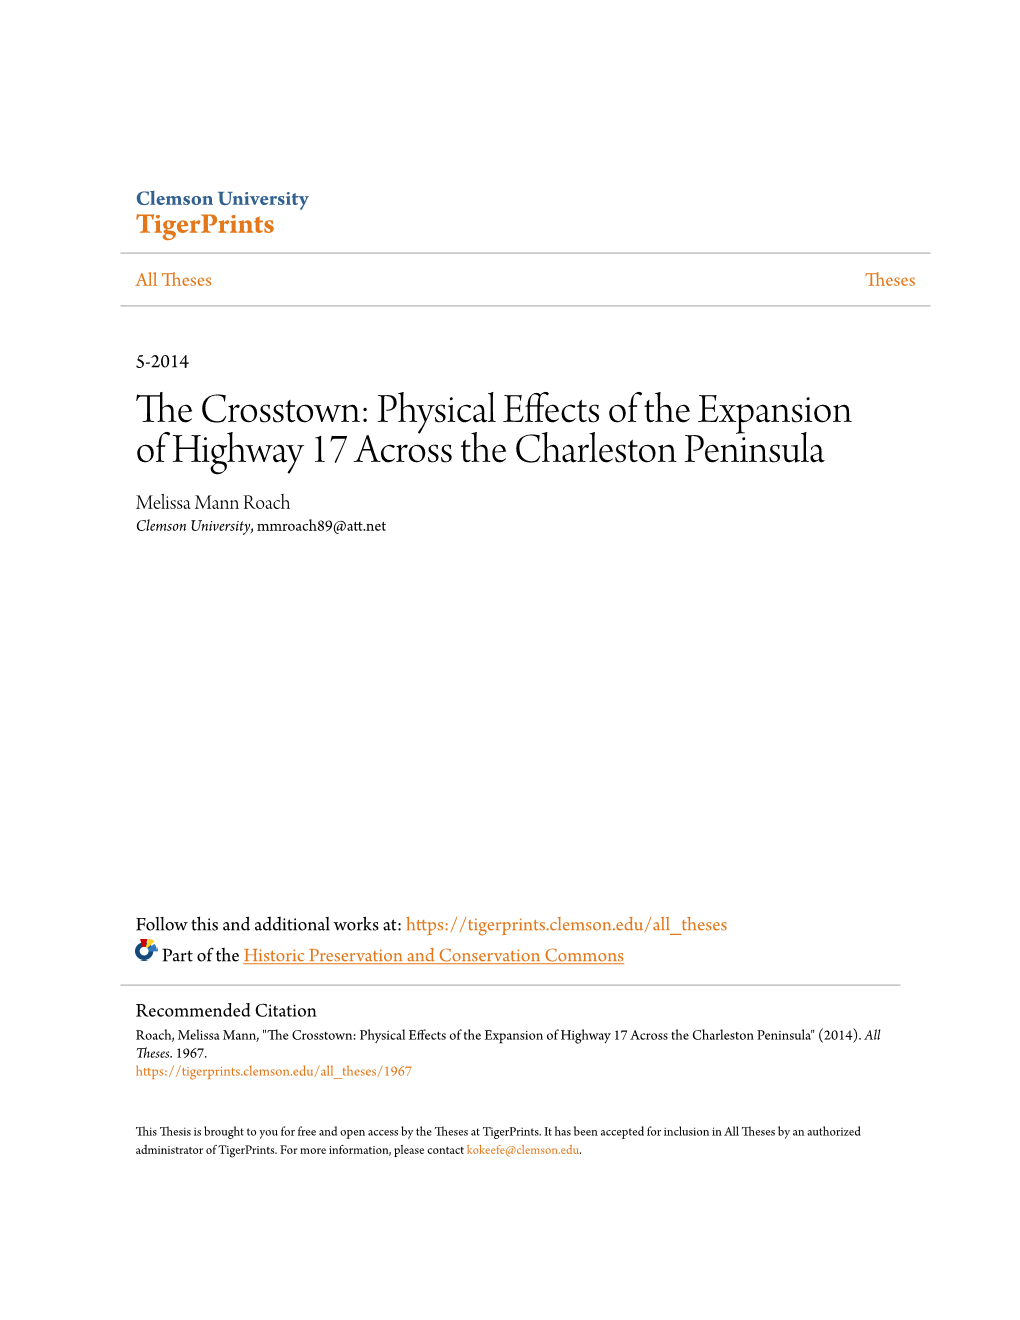 The Crosstown: Physical Effects of the Expansion of Highway 17 Across the Charleston Peninsula